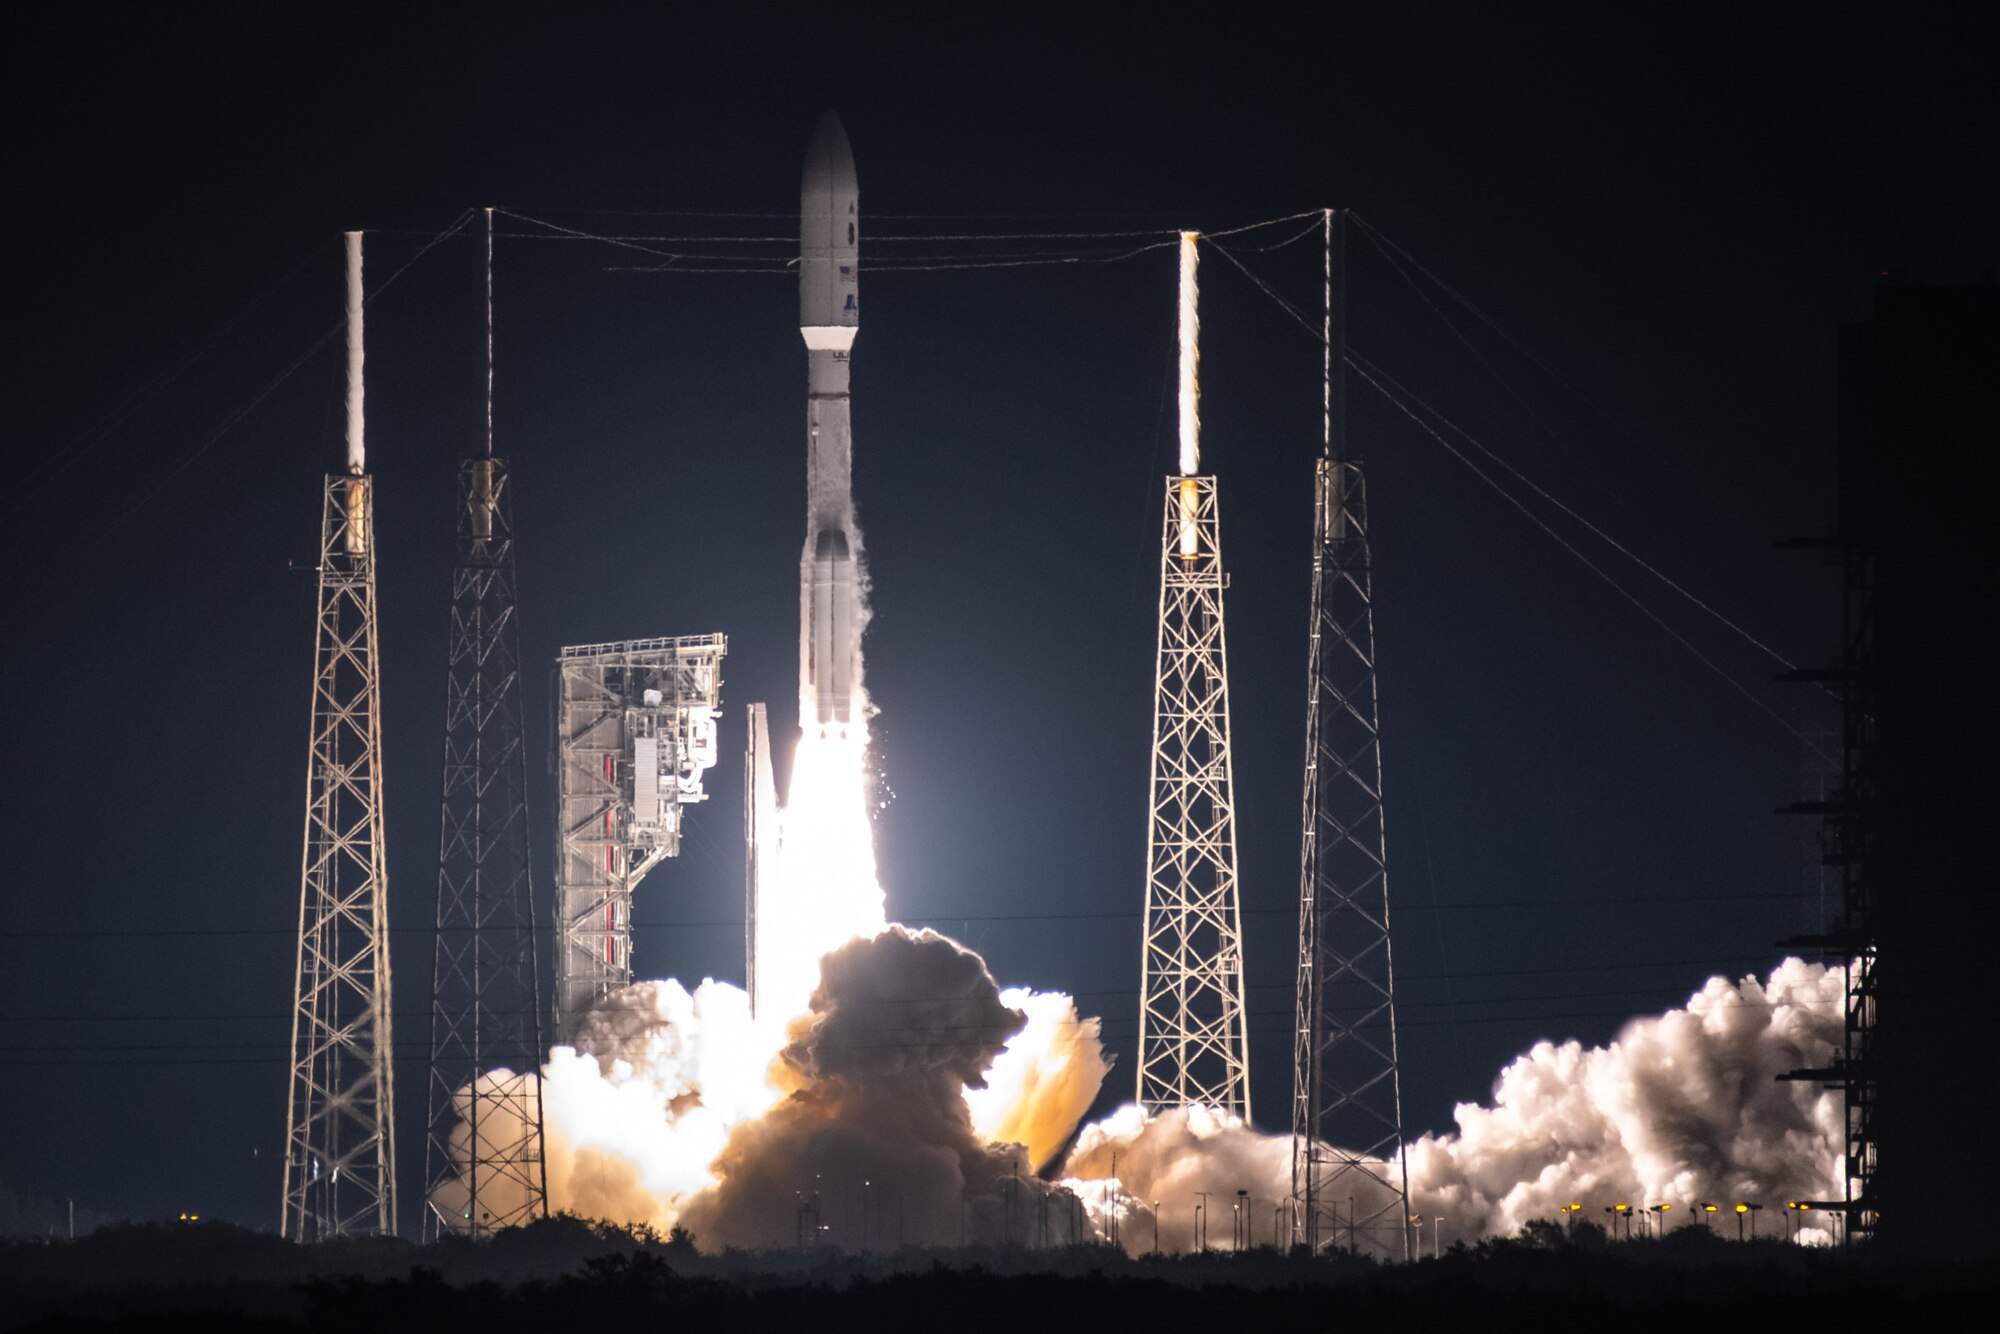 A United Launch Alliance Atlas V rocket lifts off Dec. 7 from Space Launch Complex 41 at Cape Canaveral Space Force Station, Fla. The rocket propelled two Department of Defense Space Test Program satellites into space. (U.S. Space Force photo by Joshua Conti)